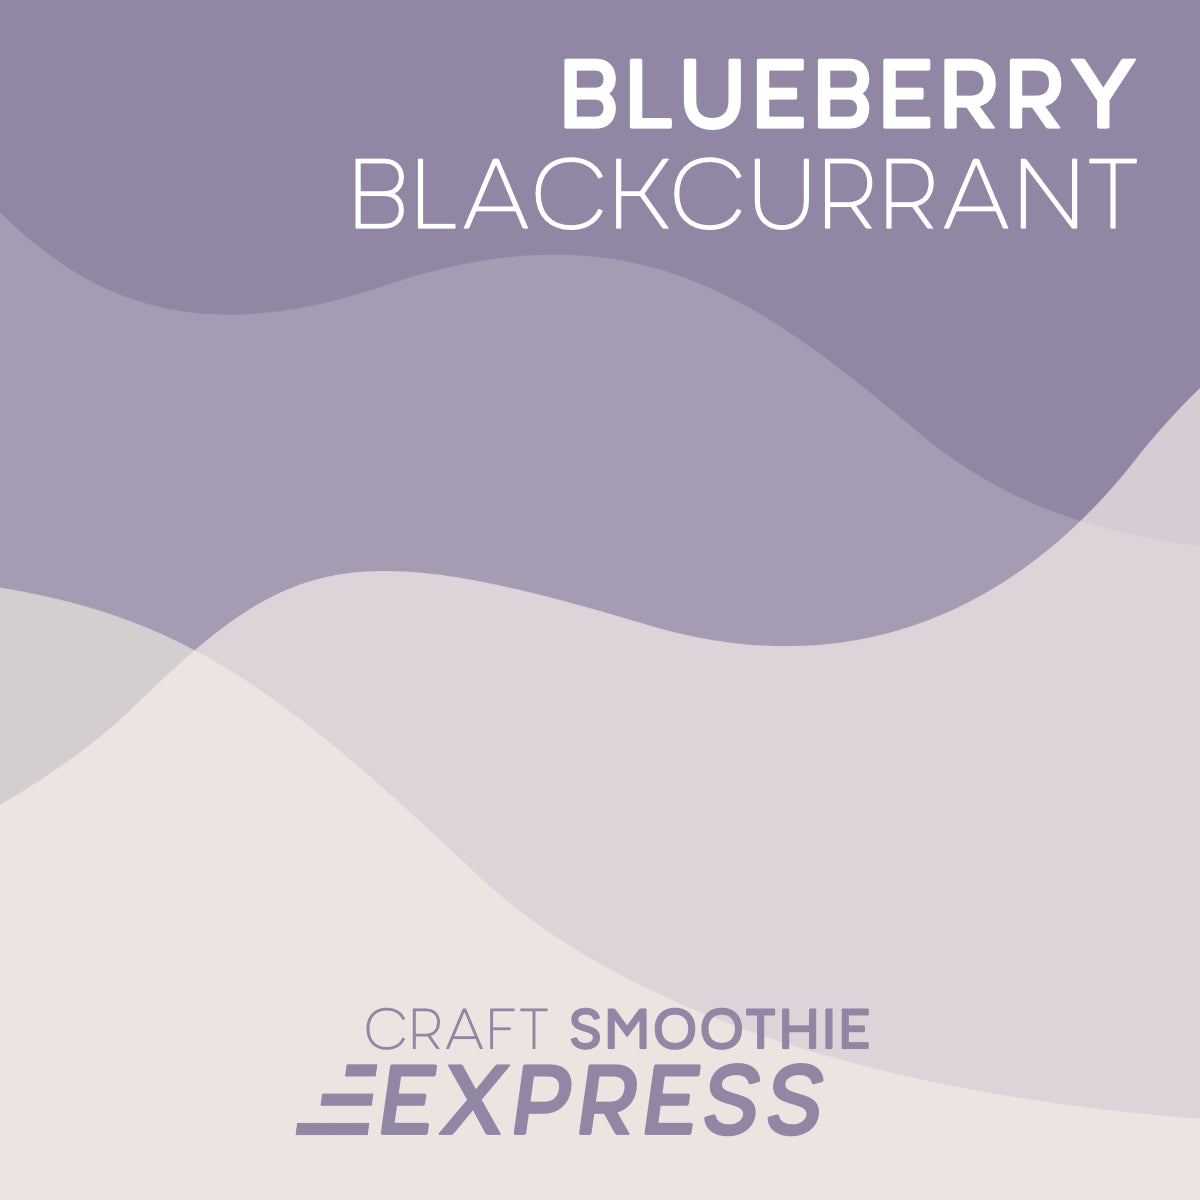 BLUEBERRY BLACKCURRANT Superfood Smoothie